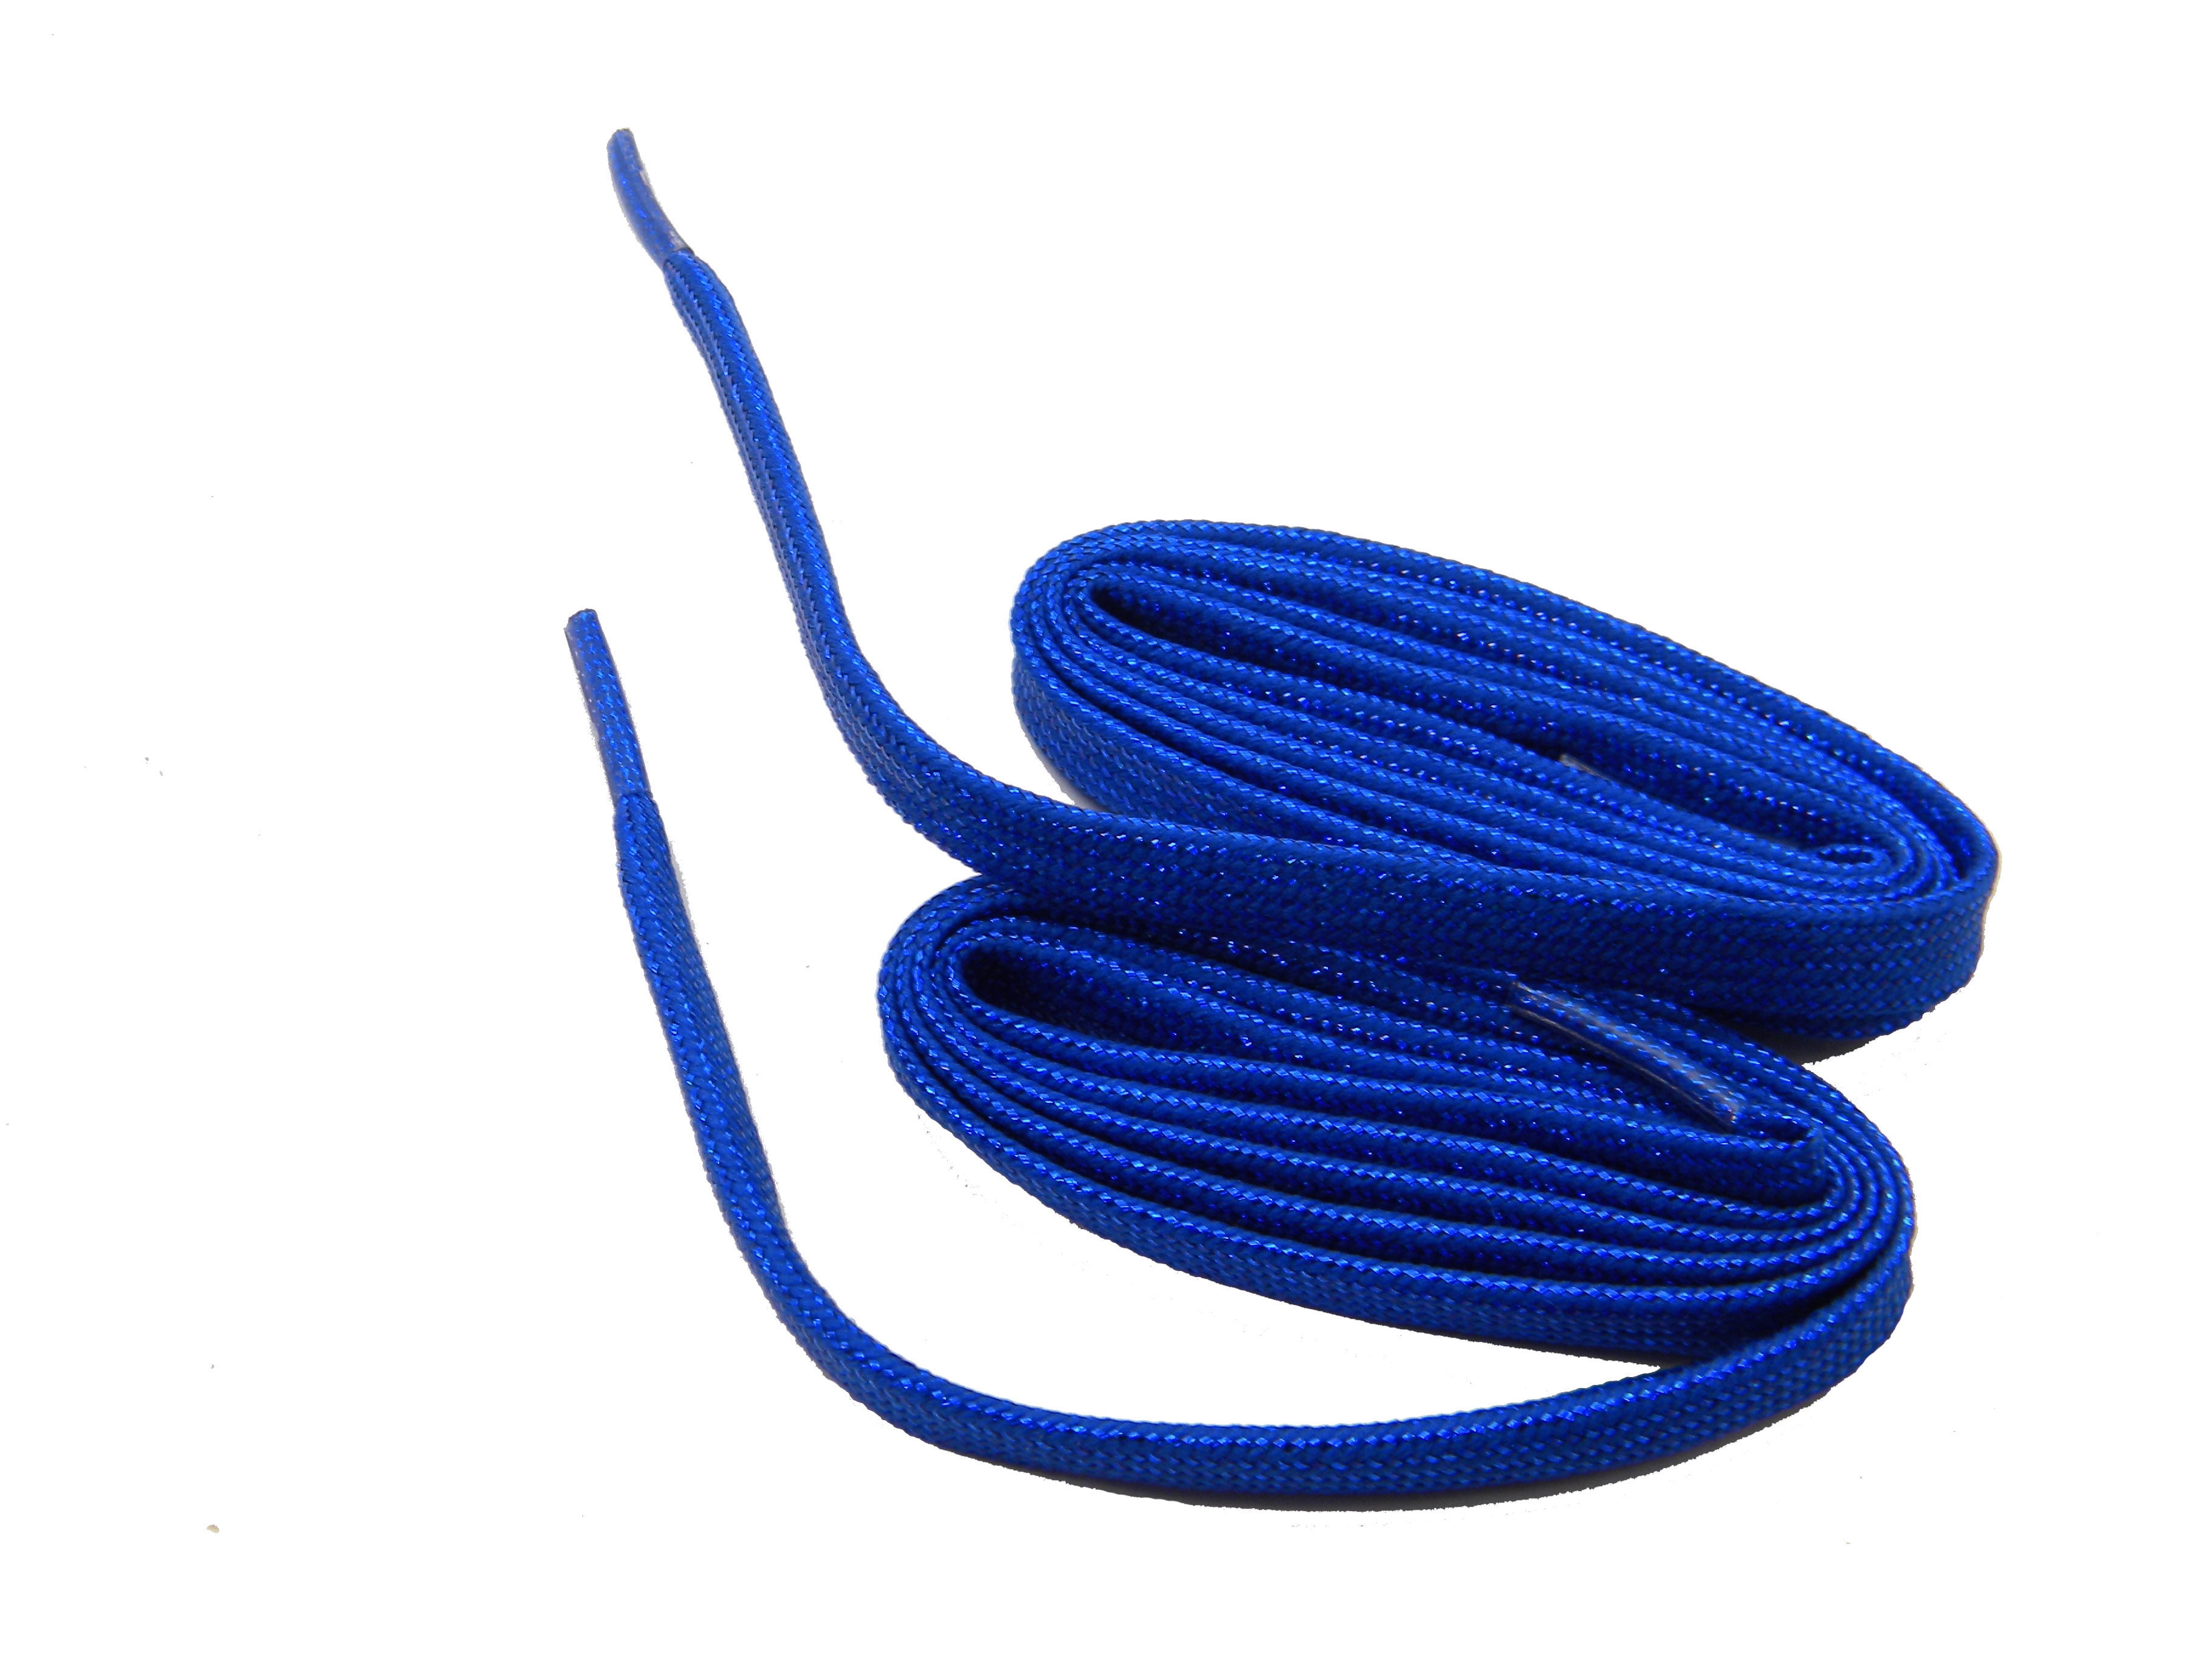 2 Pairs Round Athletic Sport Sneaker "Royal Blue" 27,36,45,54" String Shoelace 